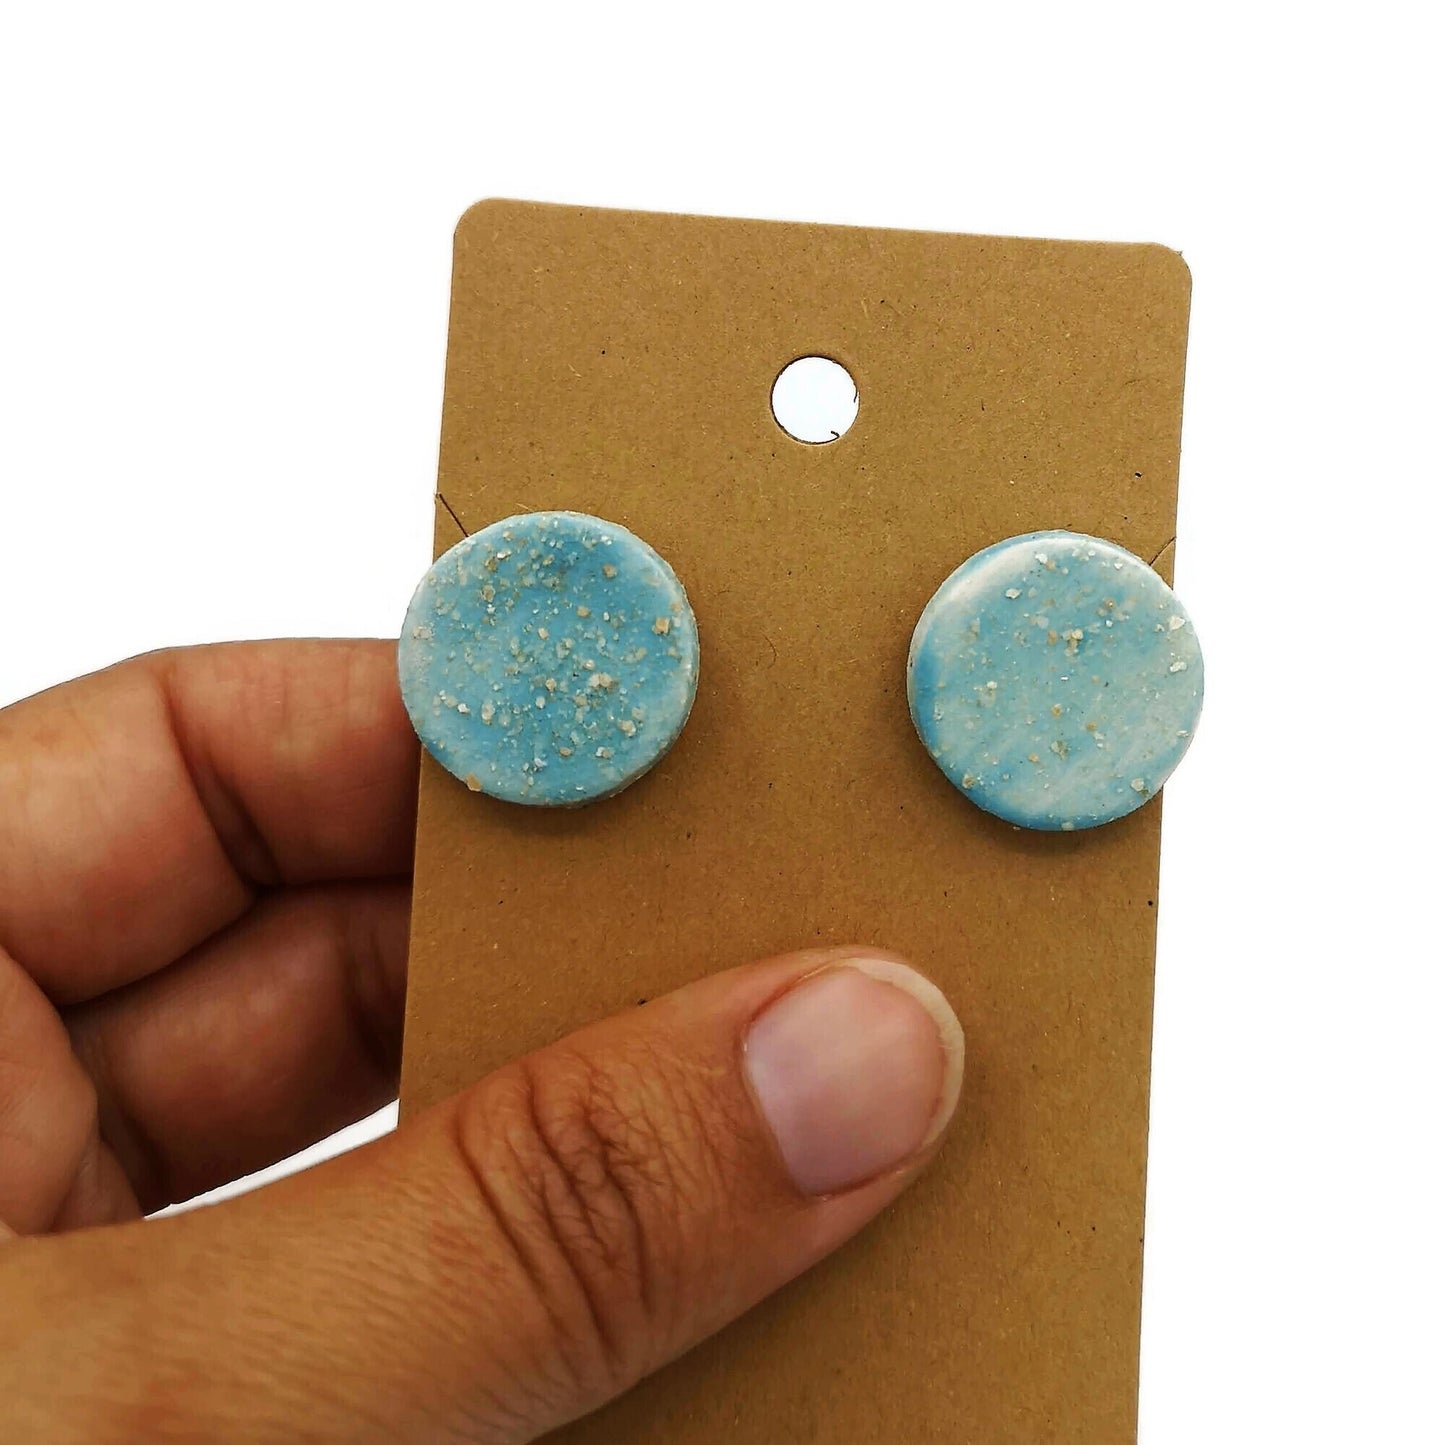 Minimalist Ceramic Earrings, Cute Best Gifts For Her, Dainty Jewelry Mom Birthday Gift From Daughter, Turquoise Blue Small Stud Errings - Ceramica Ana Rafael